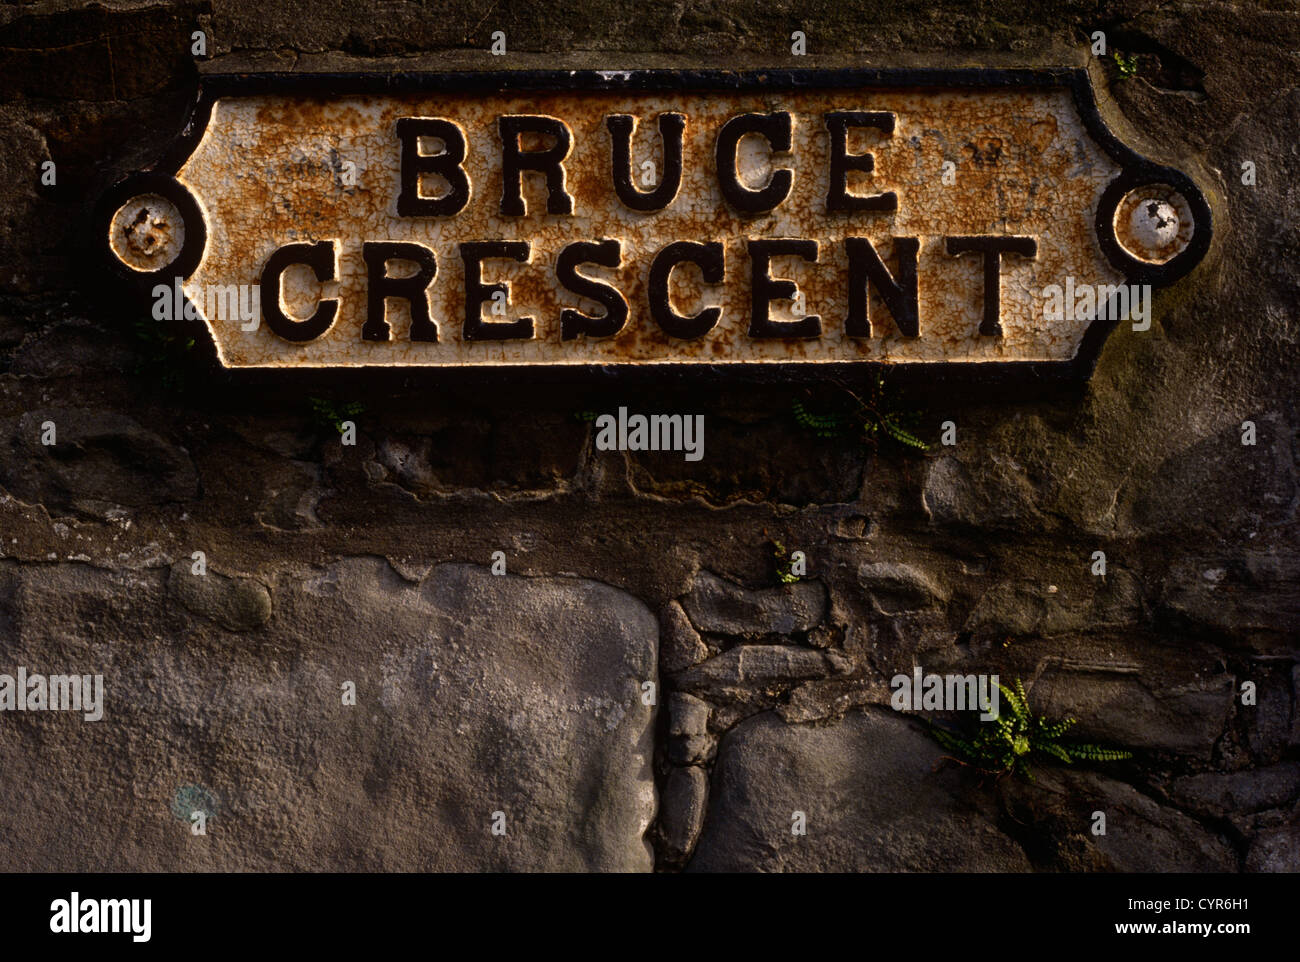 A detail of the stone wall sign for Bruce Crescent in the old area of Ayr in Scotland. Stock Photo